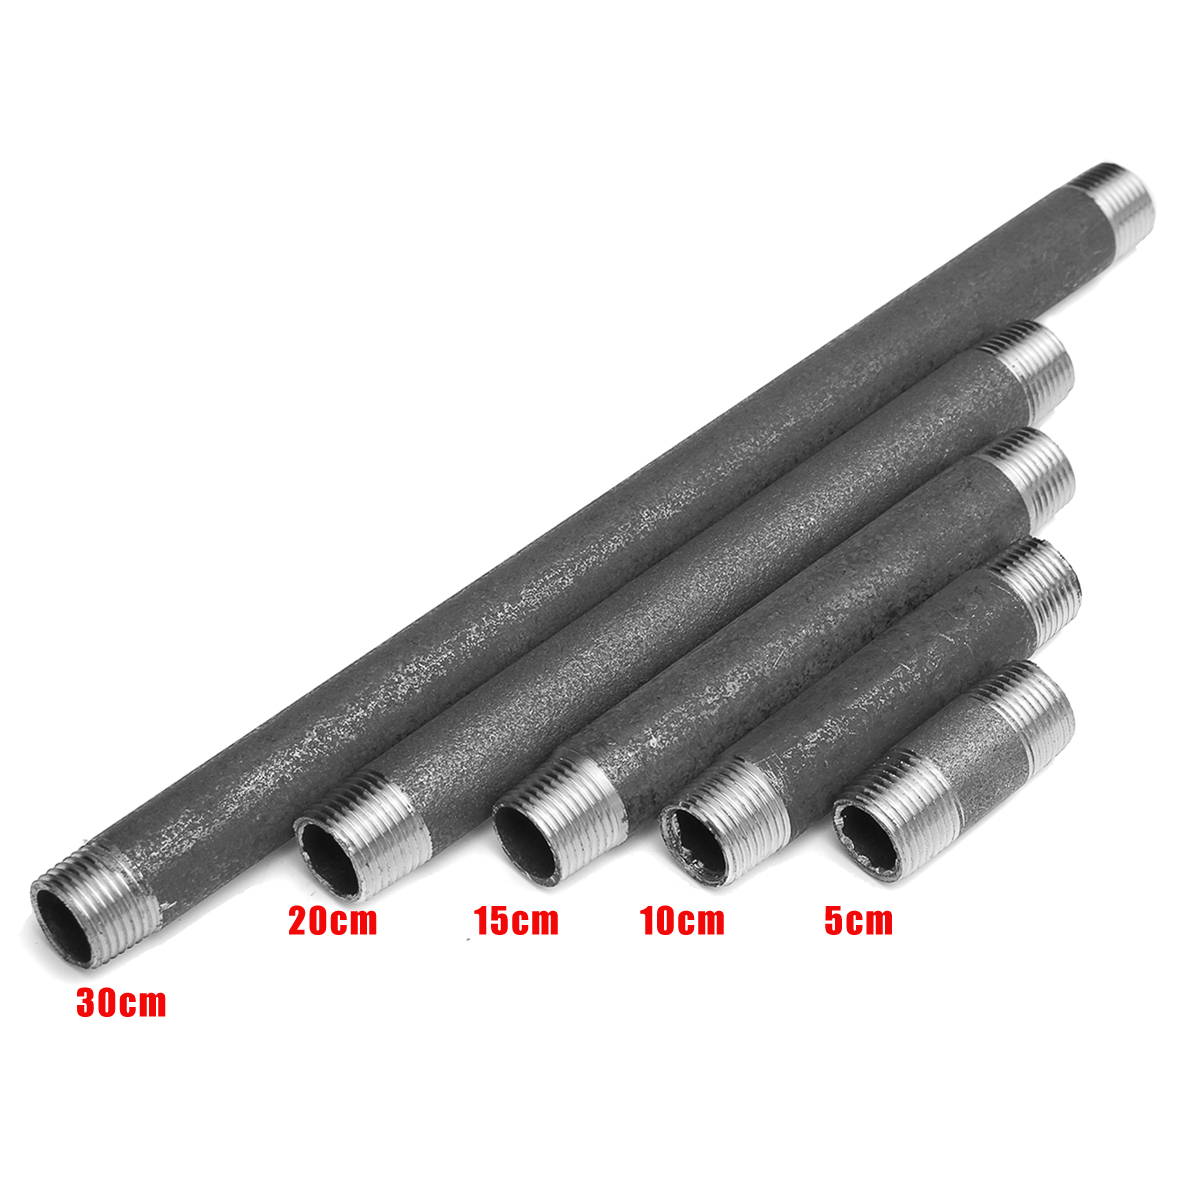 12quot-DN15-Malleable-Iron-Threaded-Pipe-For-DIY-Flange-Fittings-Furniture-Bracket-51015202530cm-1320411